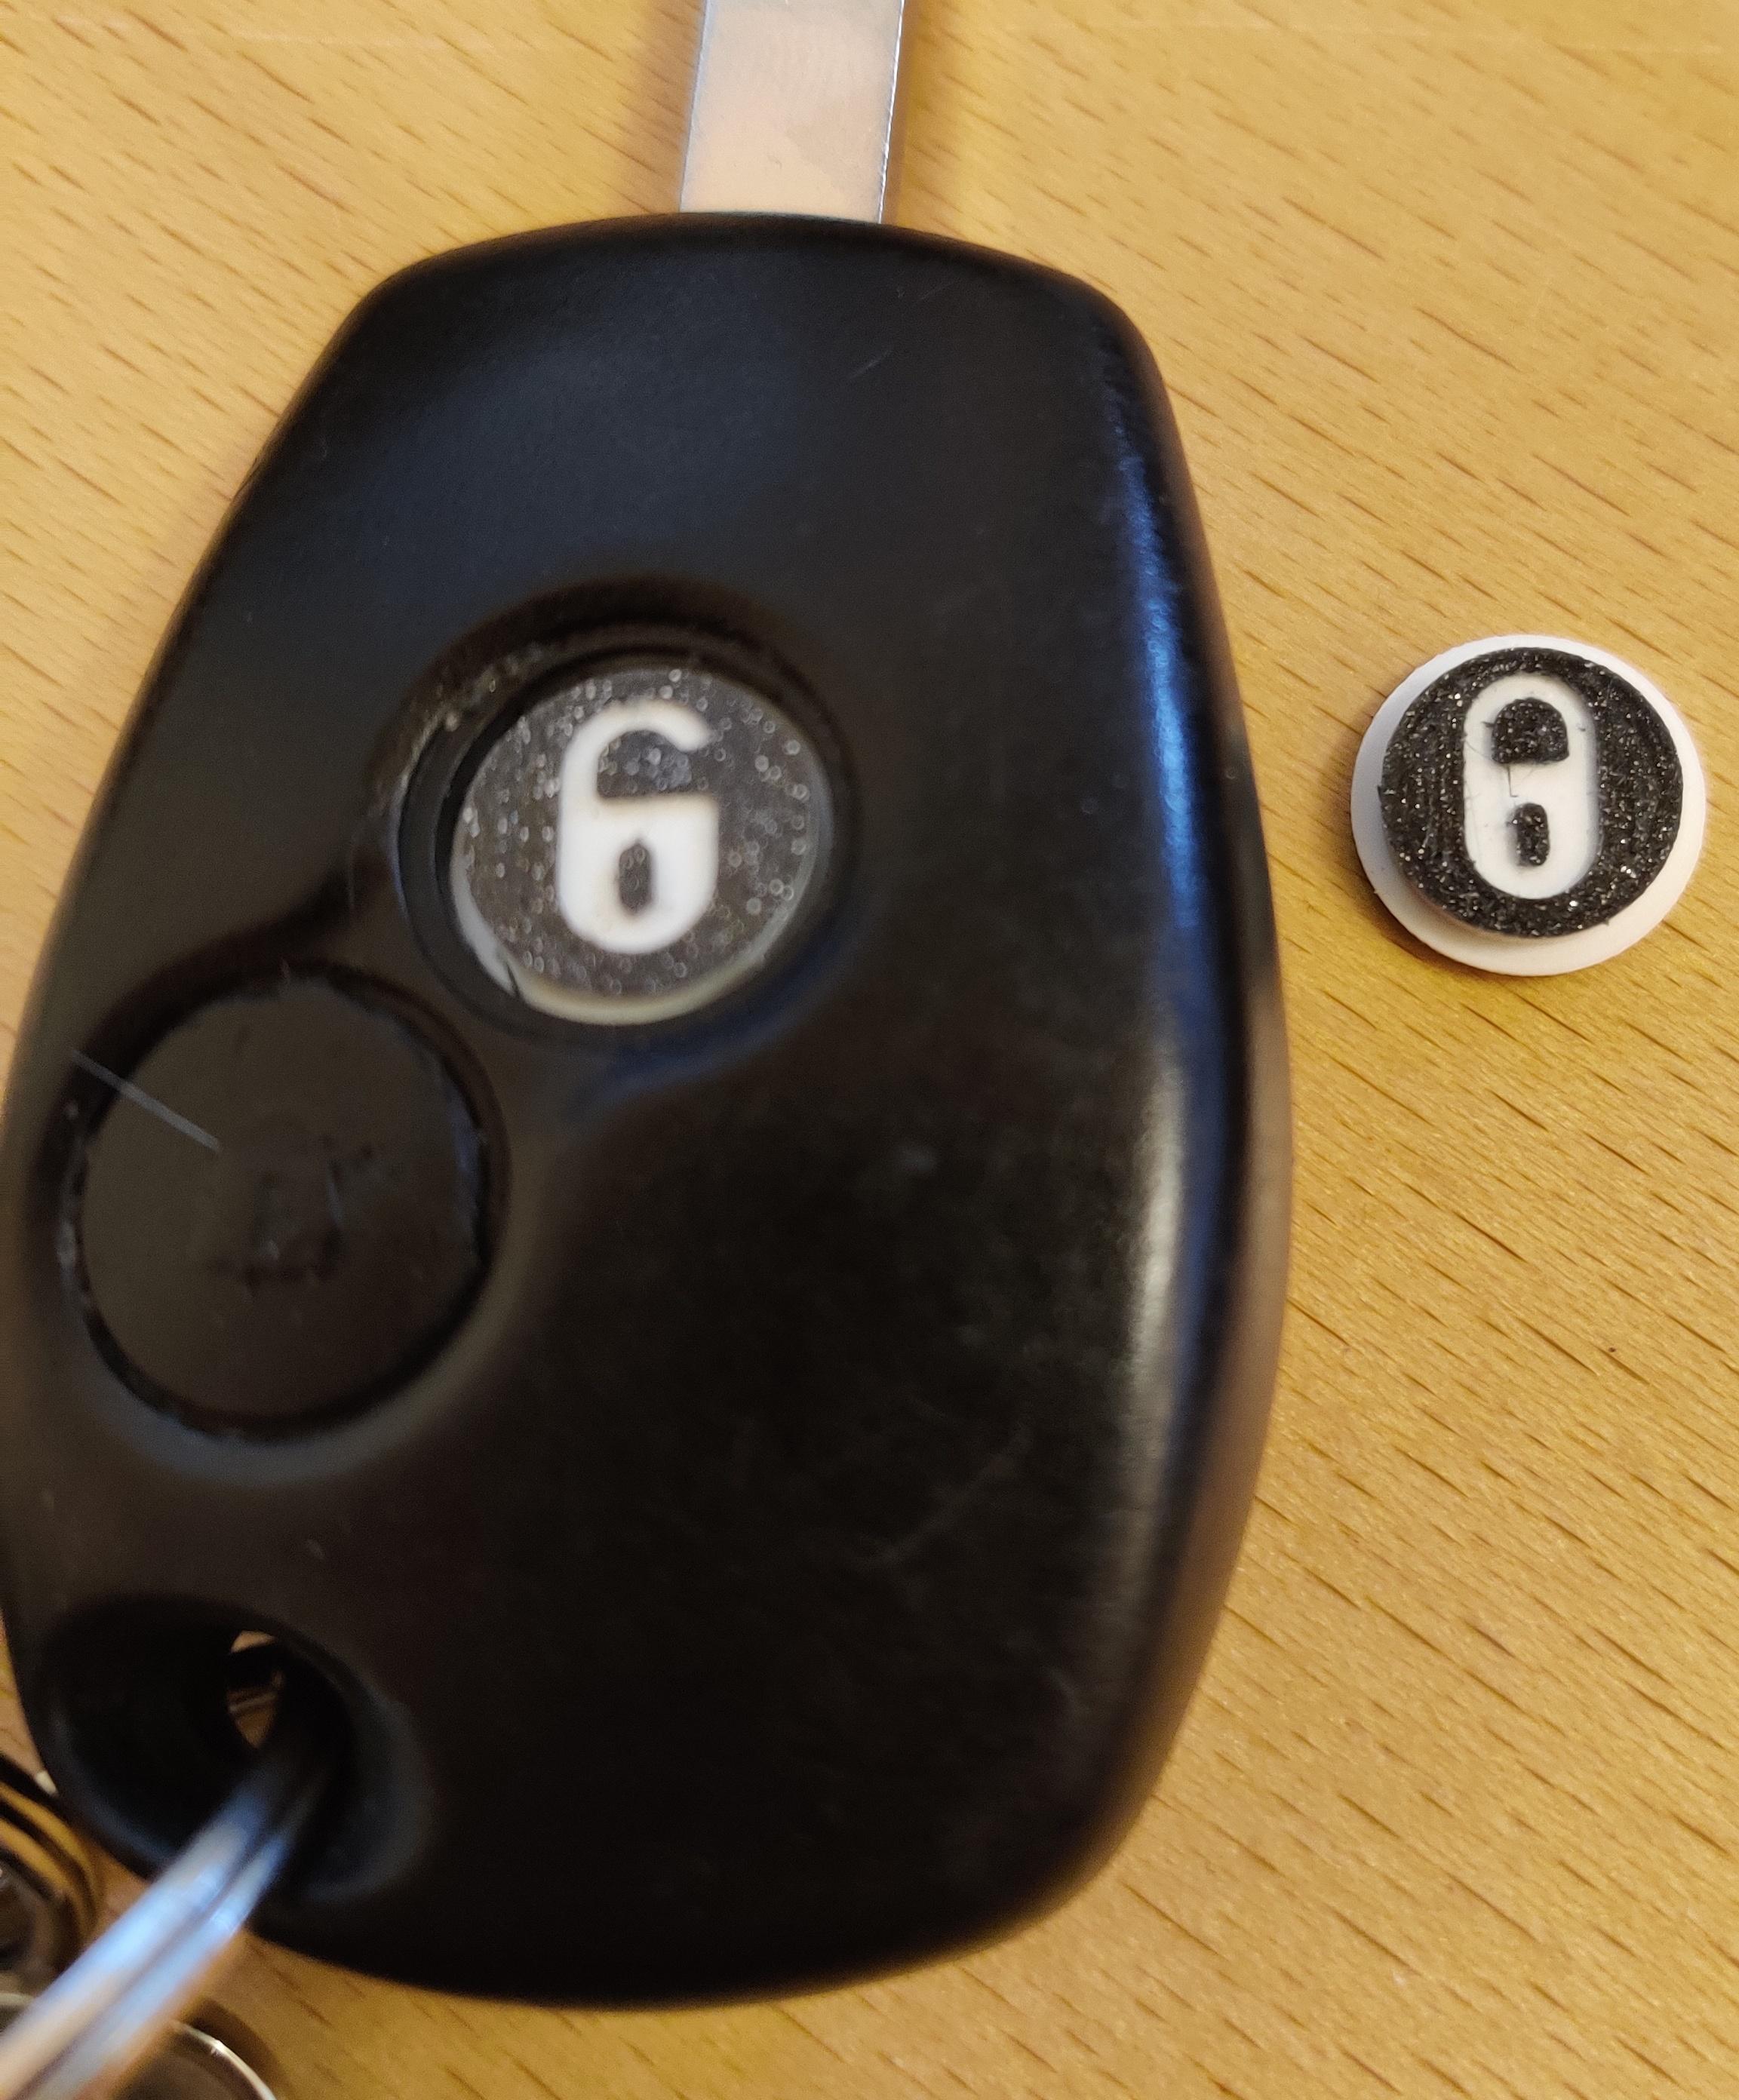 Replacement unlock button for Renault key fob 3d model